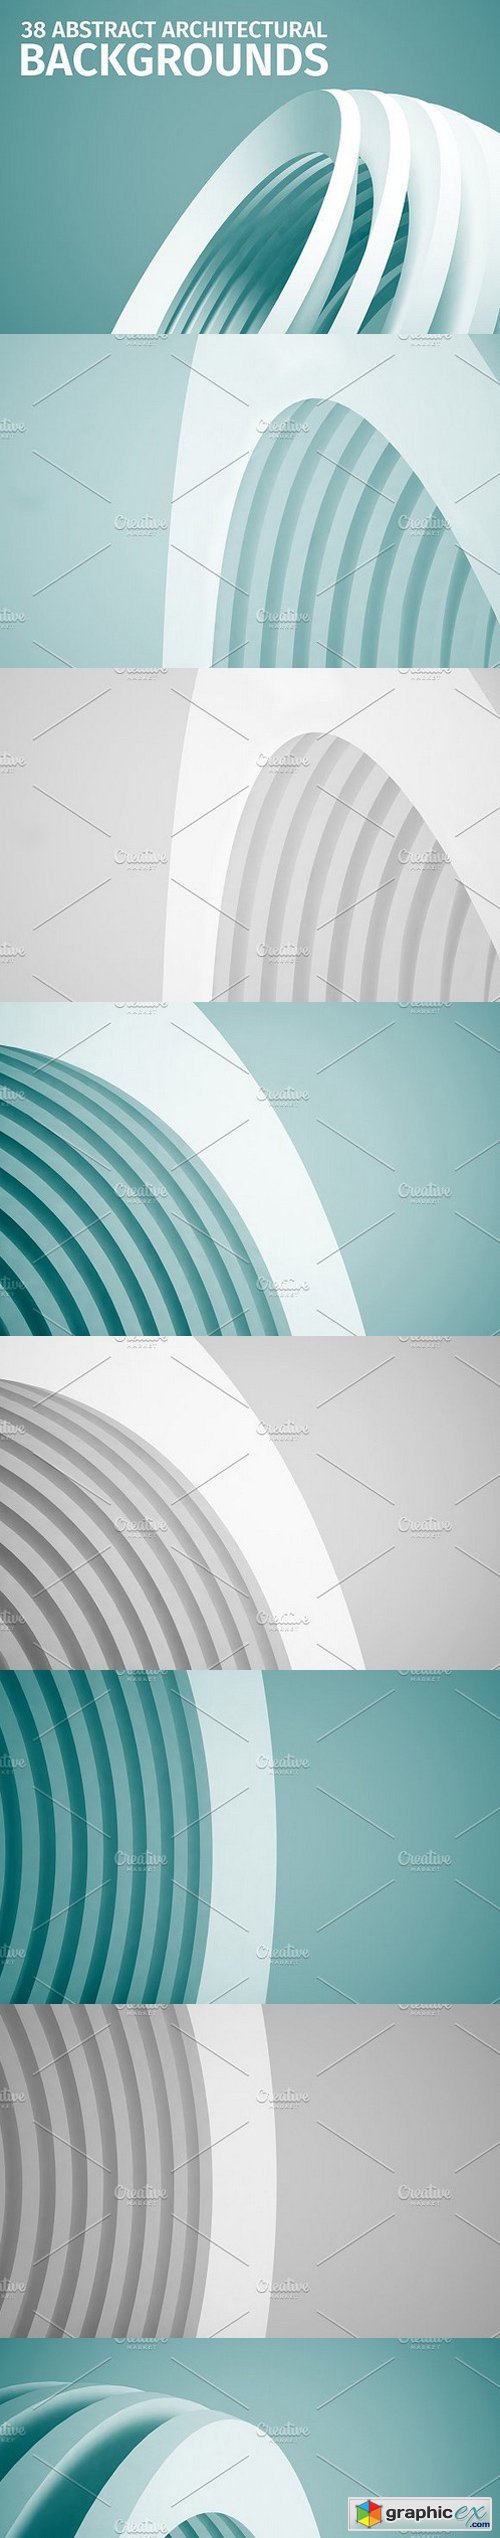 38 Abstract Architecture Backgrounds